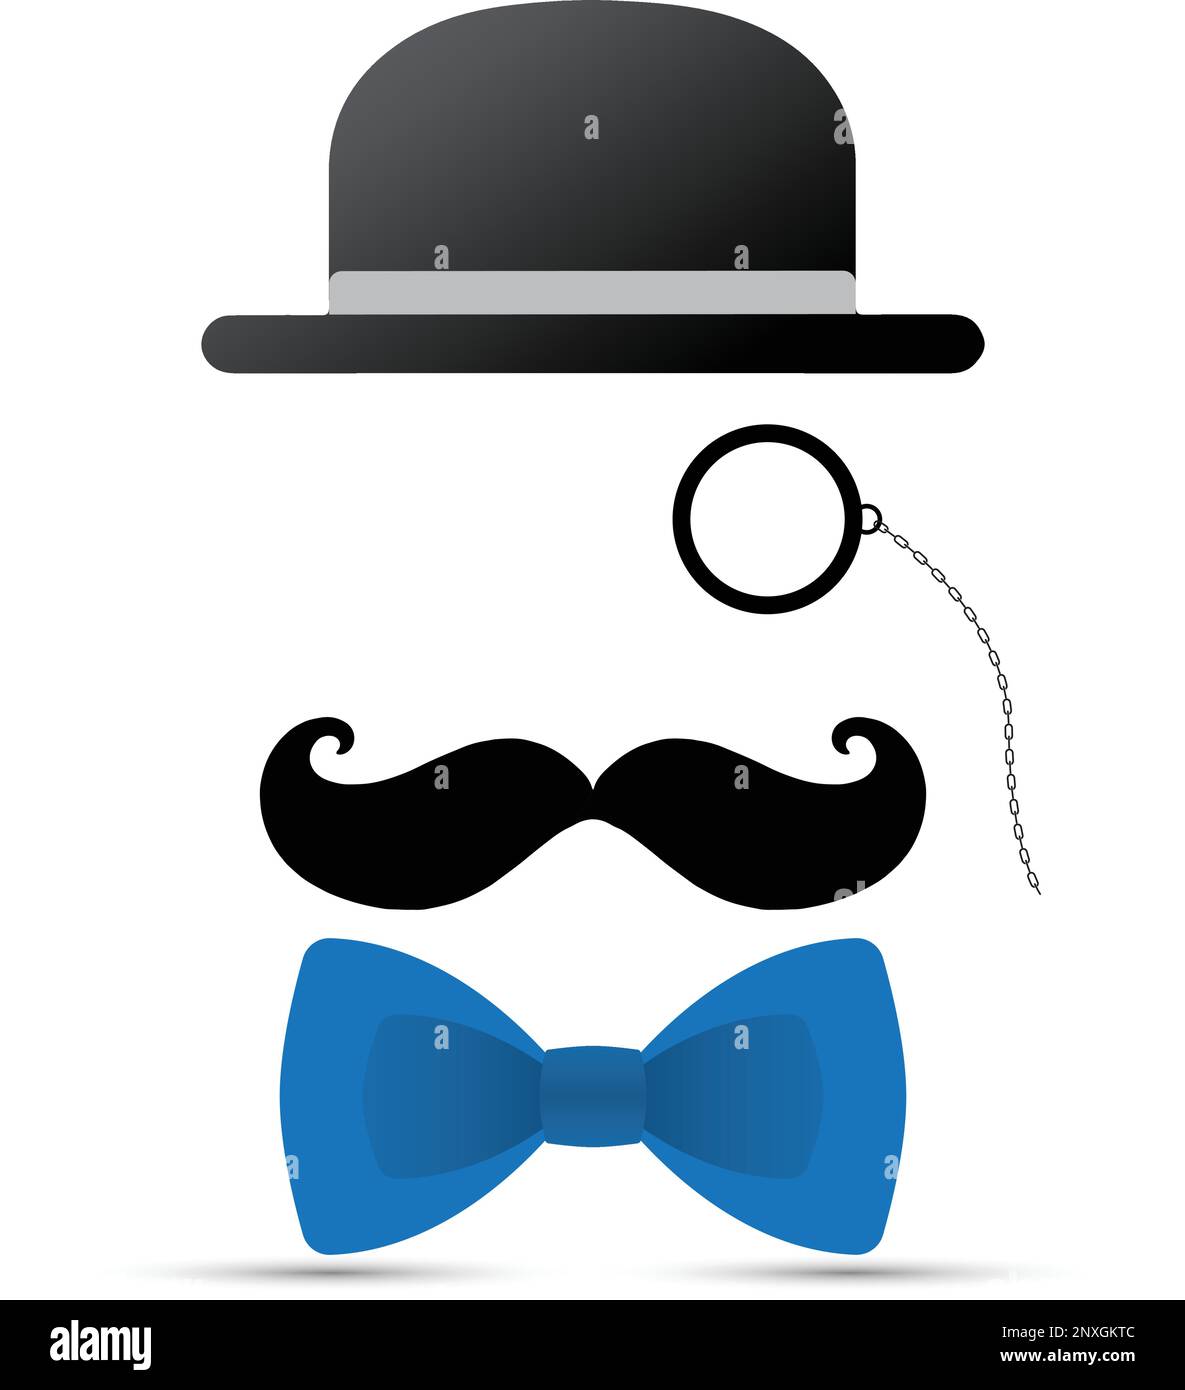 Black mustache, monocle, hat and blue bowtie on white background Stock Vector